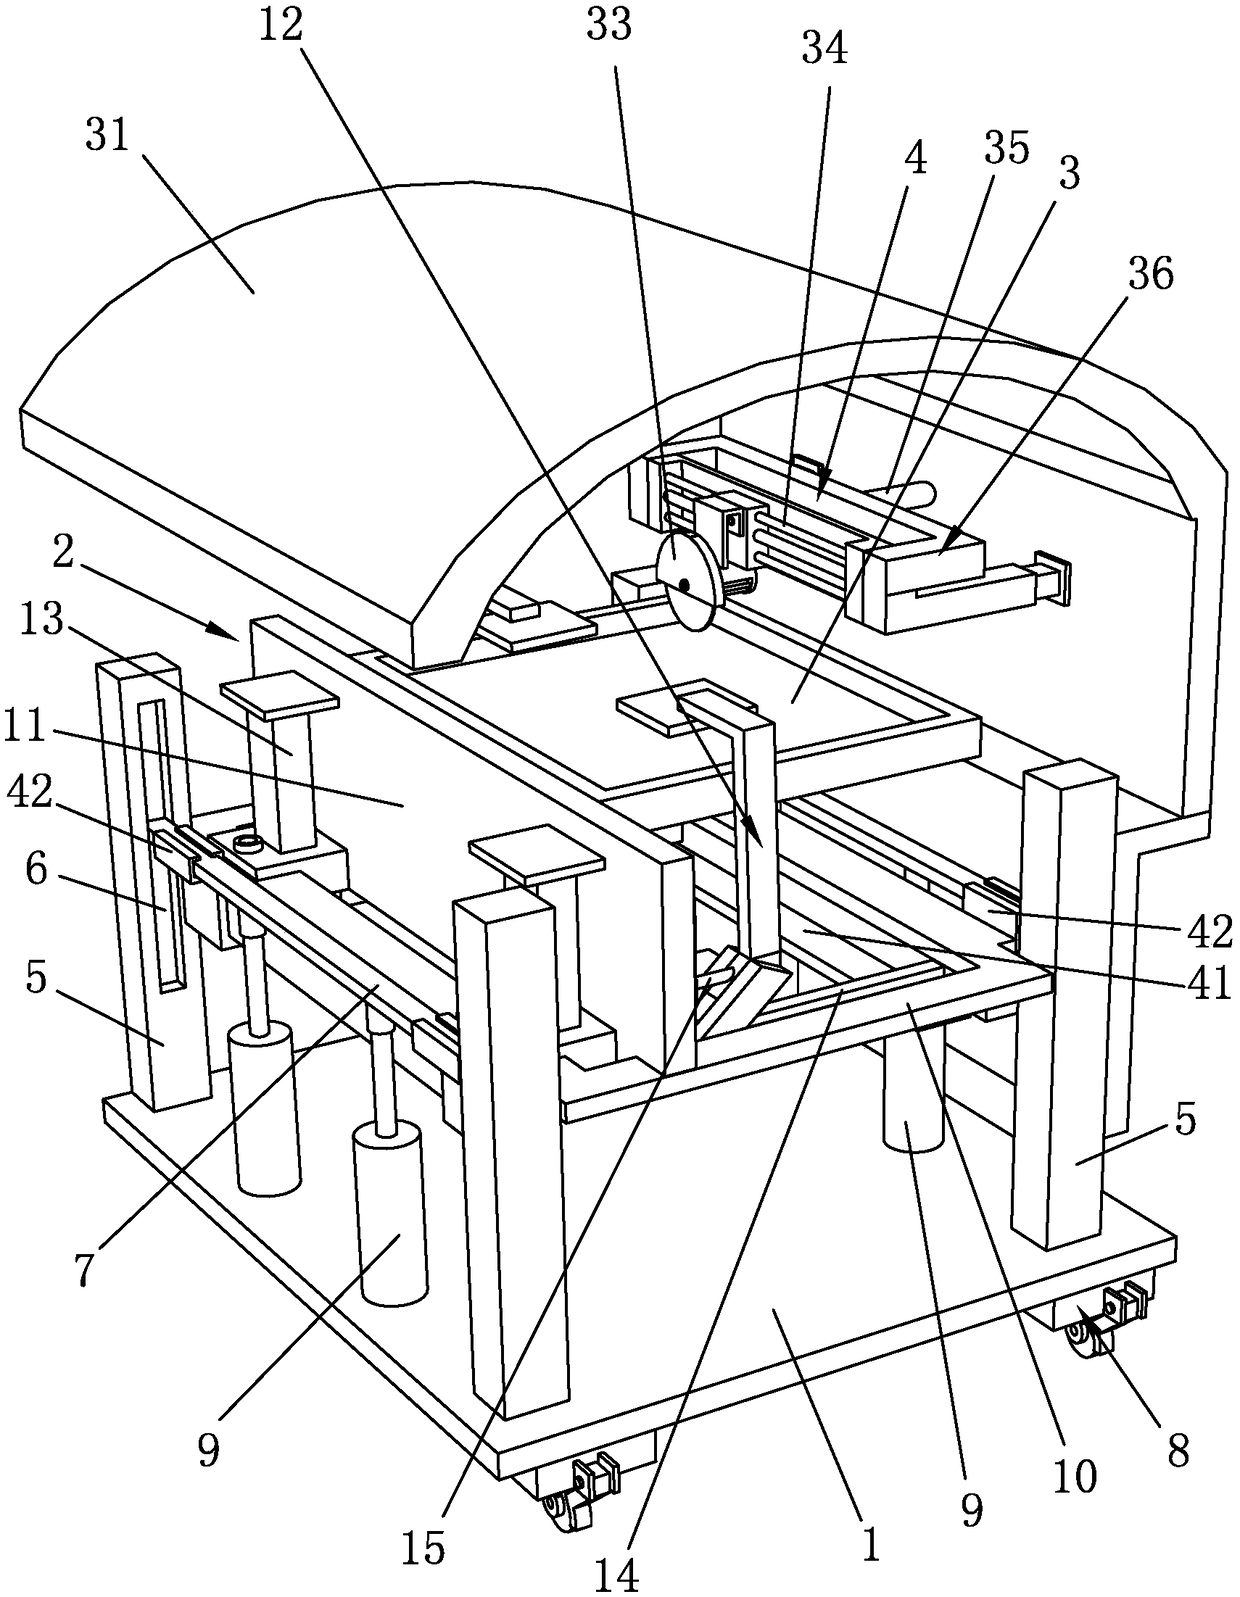 Cutting device for production of hardware accessories